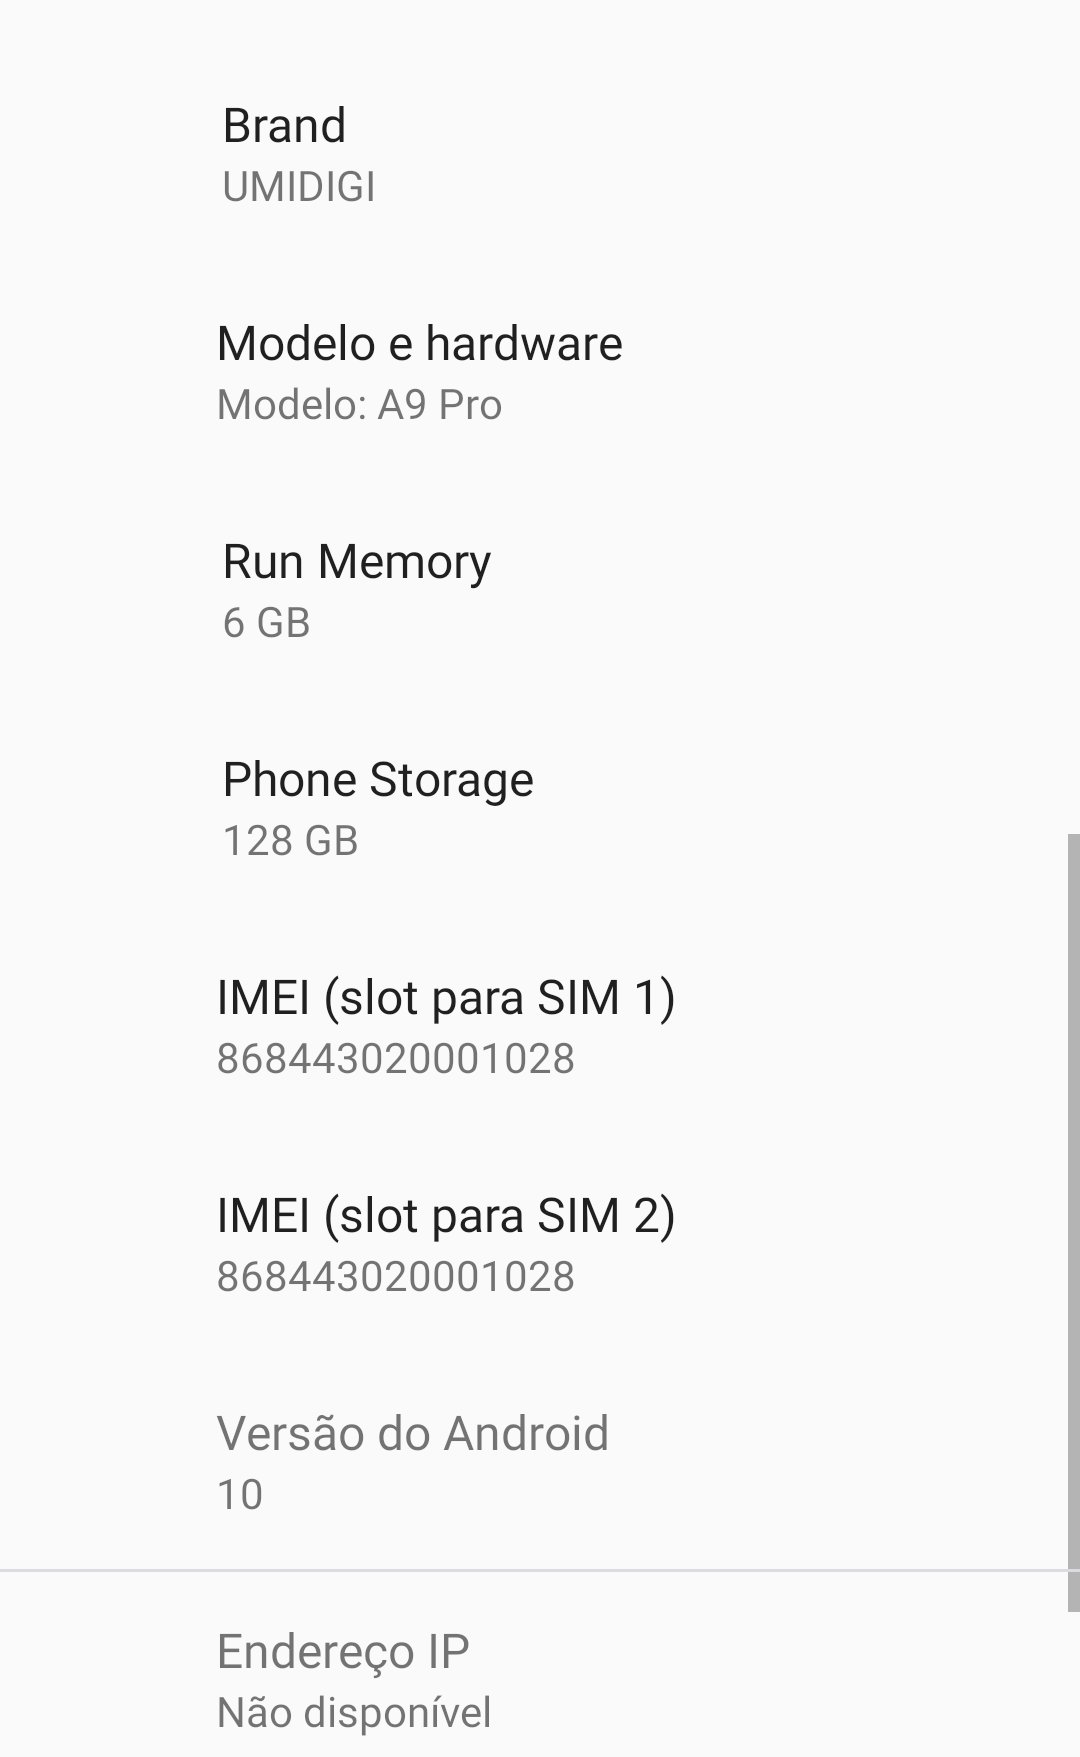 UMIDIGI COMMUNITY-Utility-Repair IMEI with SN Writer (for almost all  UMI(DIGI) phones) - Powered by Discuz!